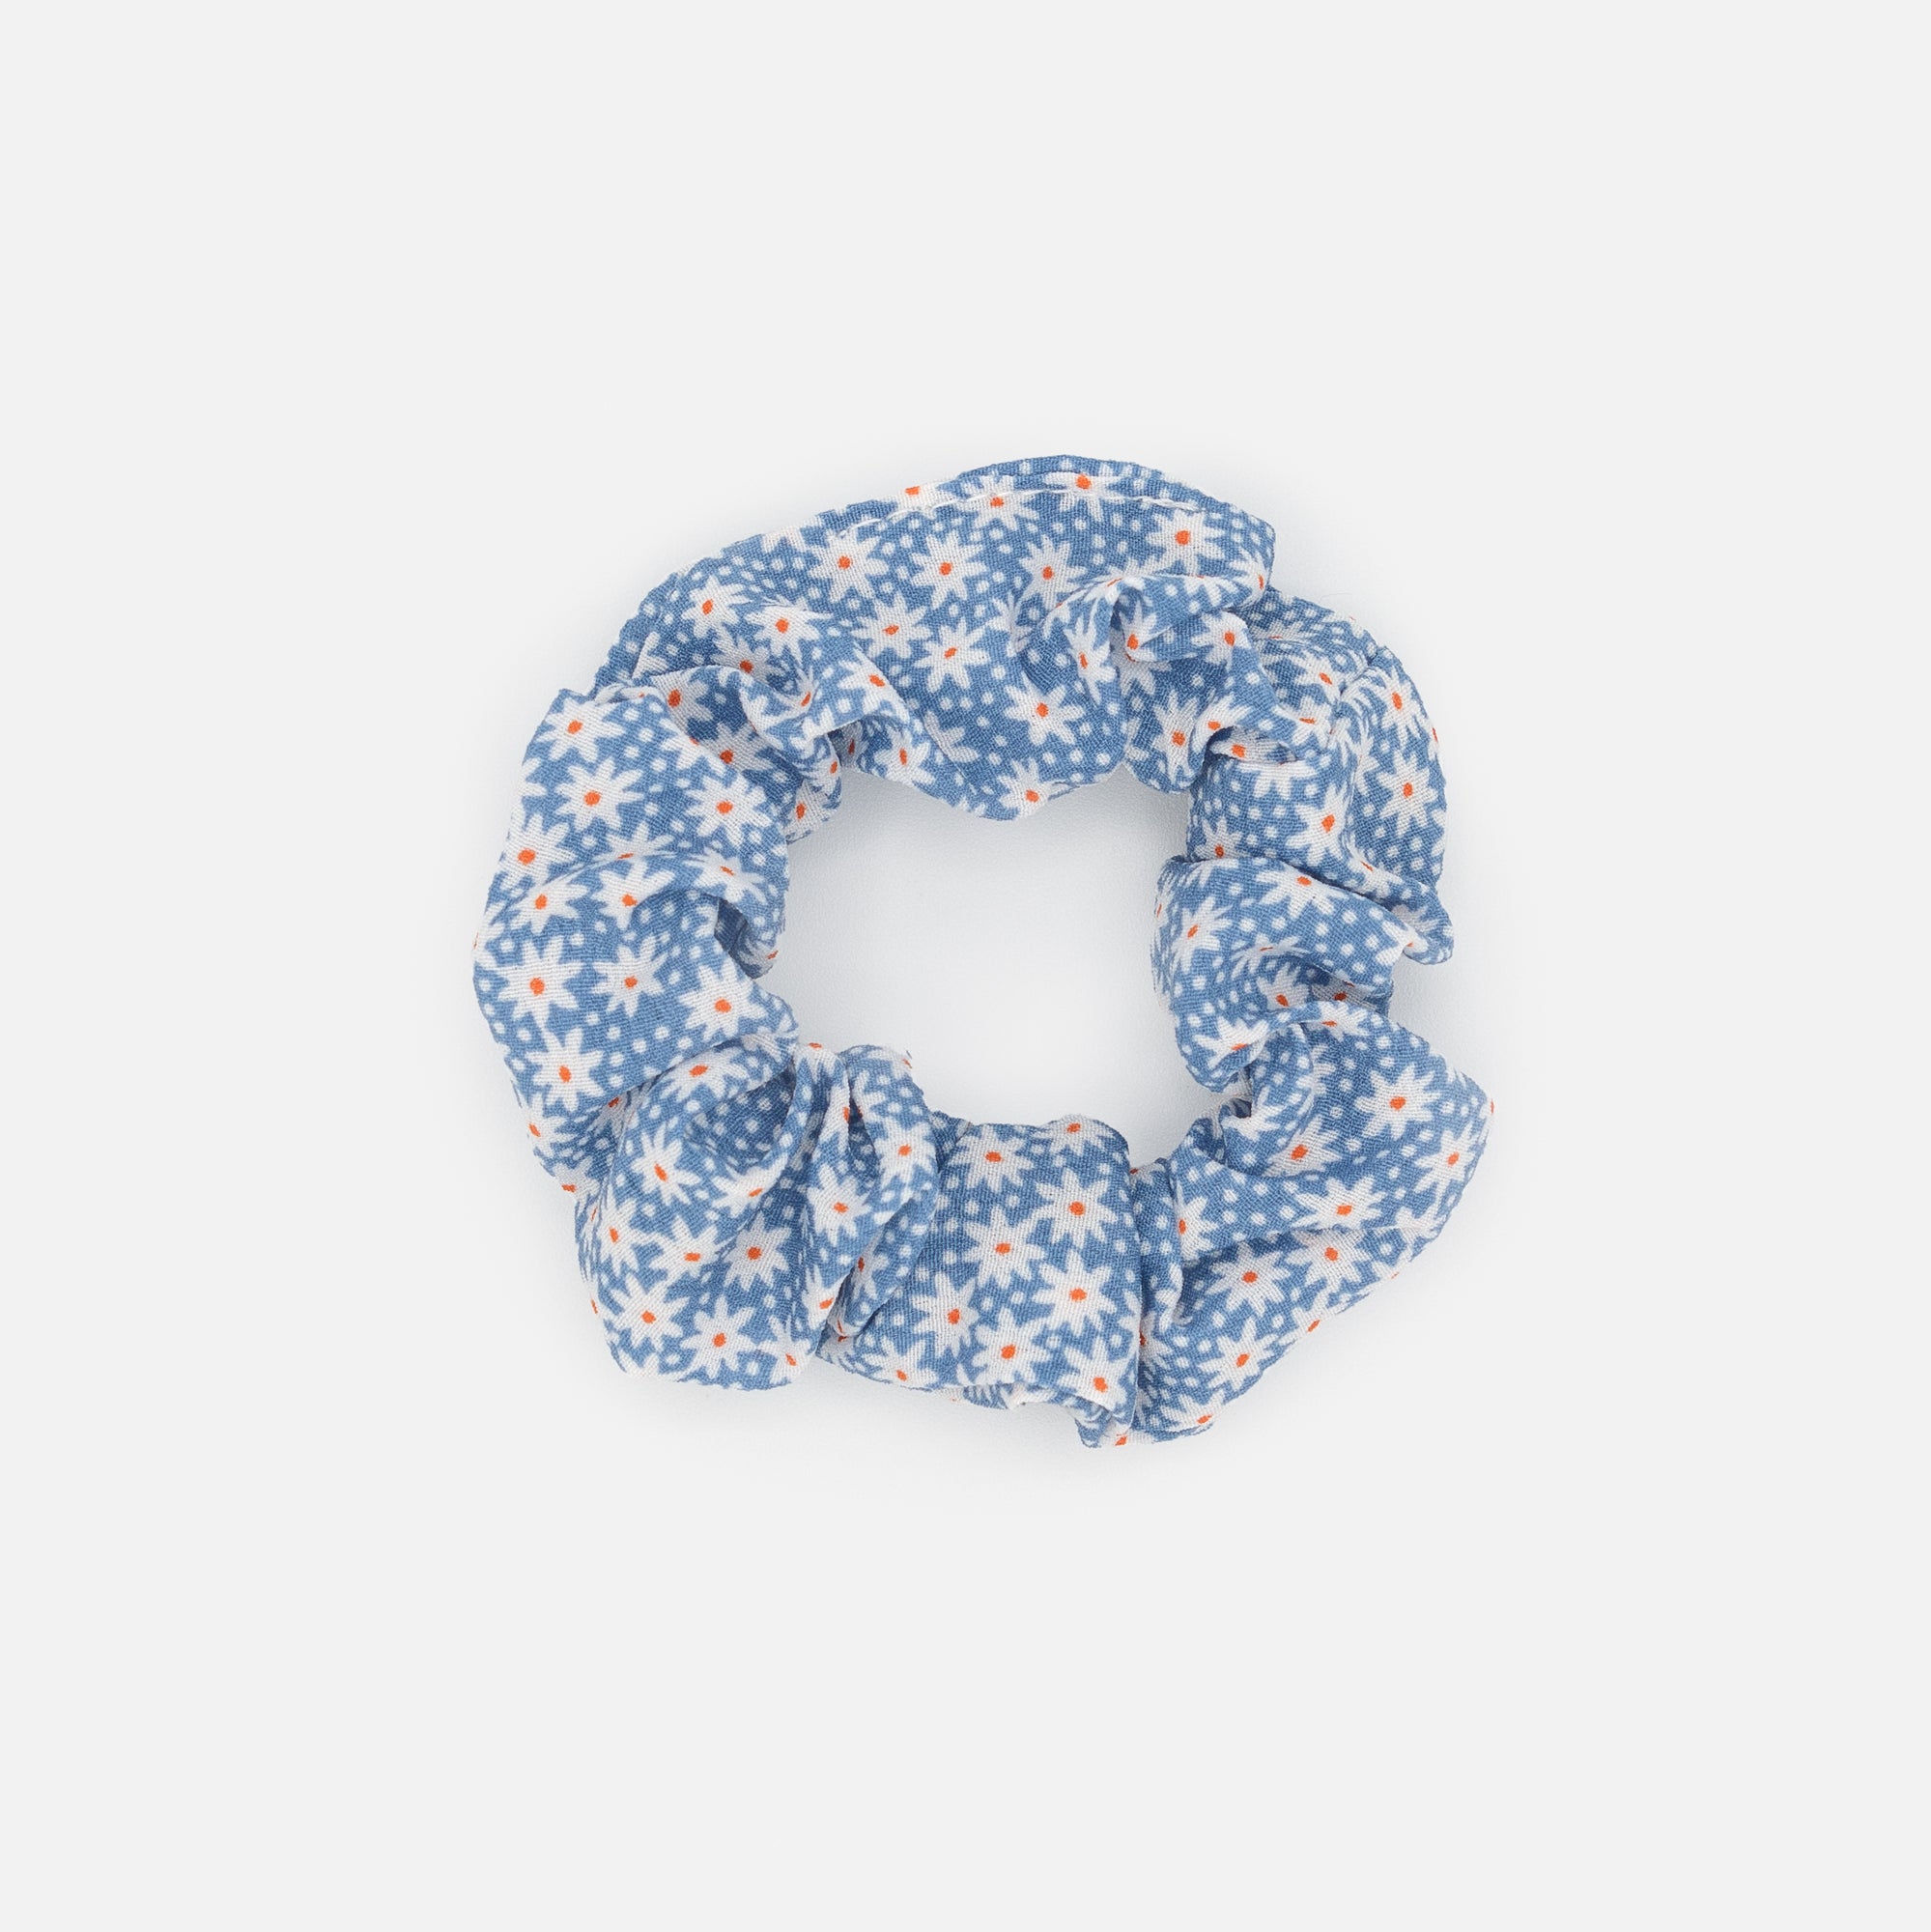 Trio of blue tones scrunchies with glitter and daisies